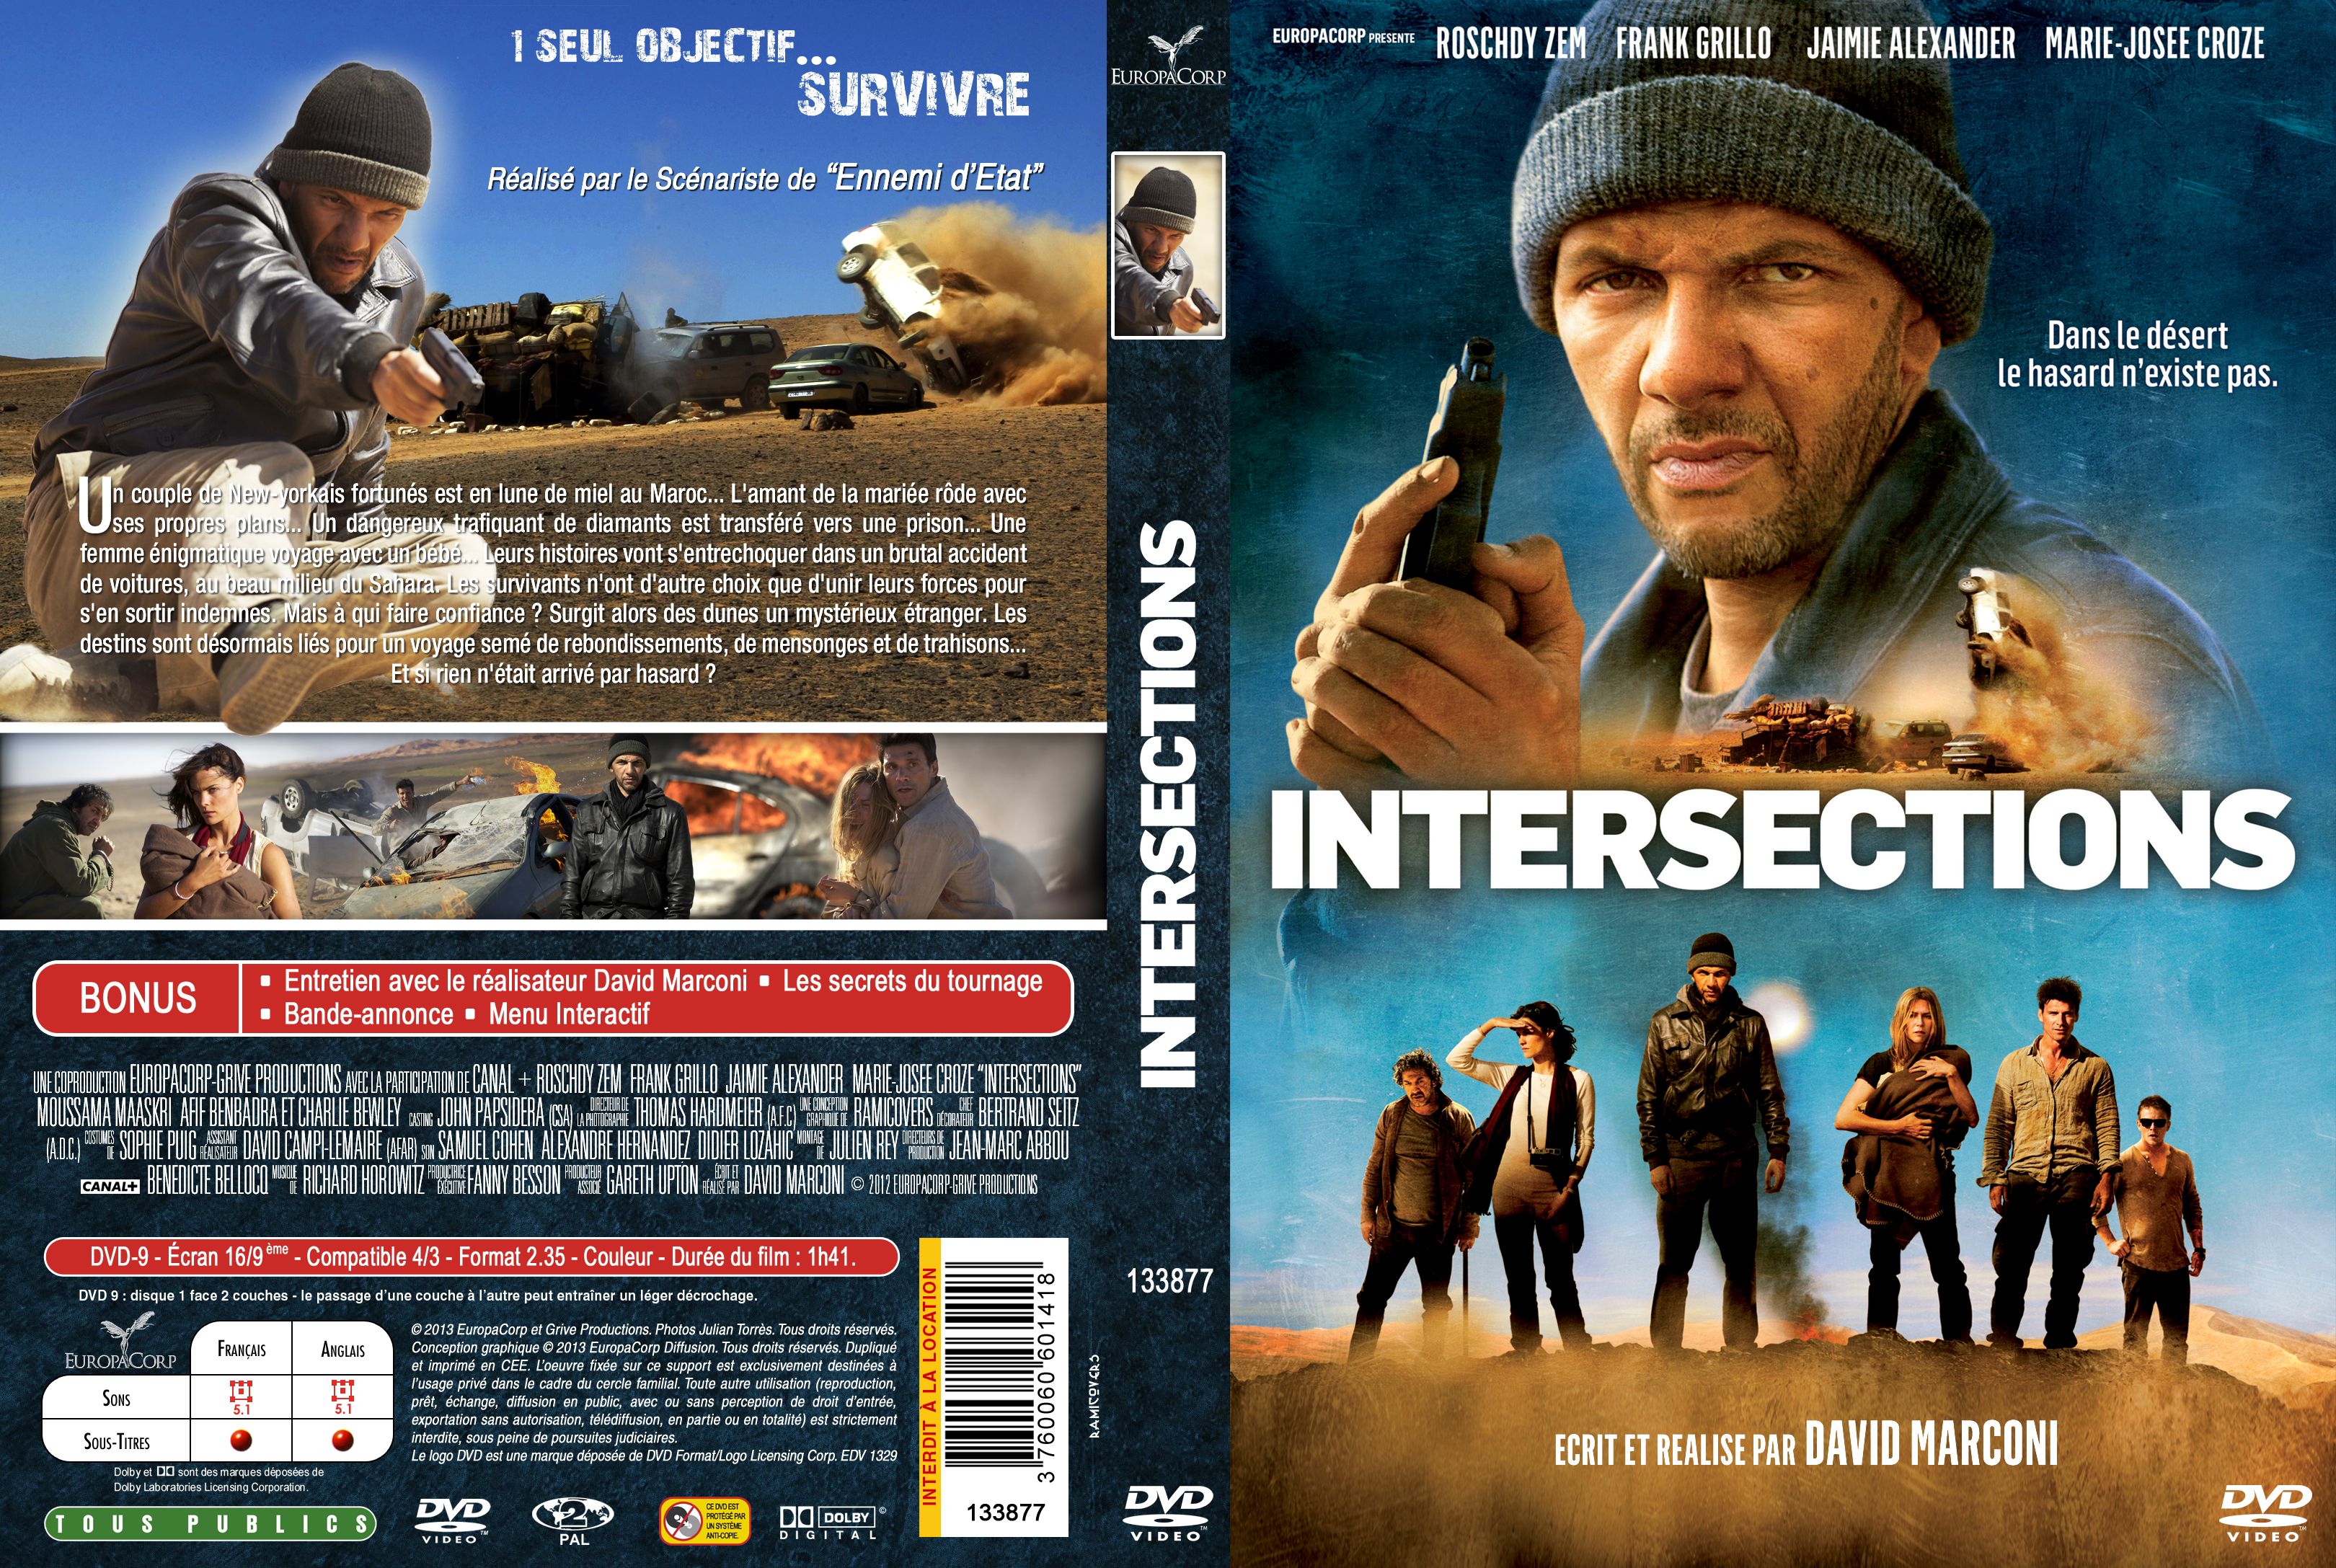 Jaquette DVD Intersections custom